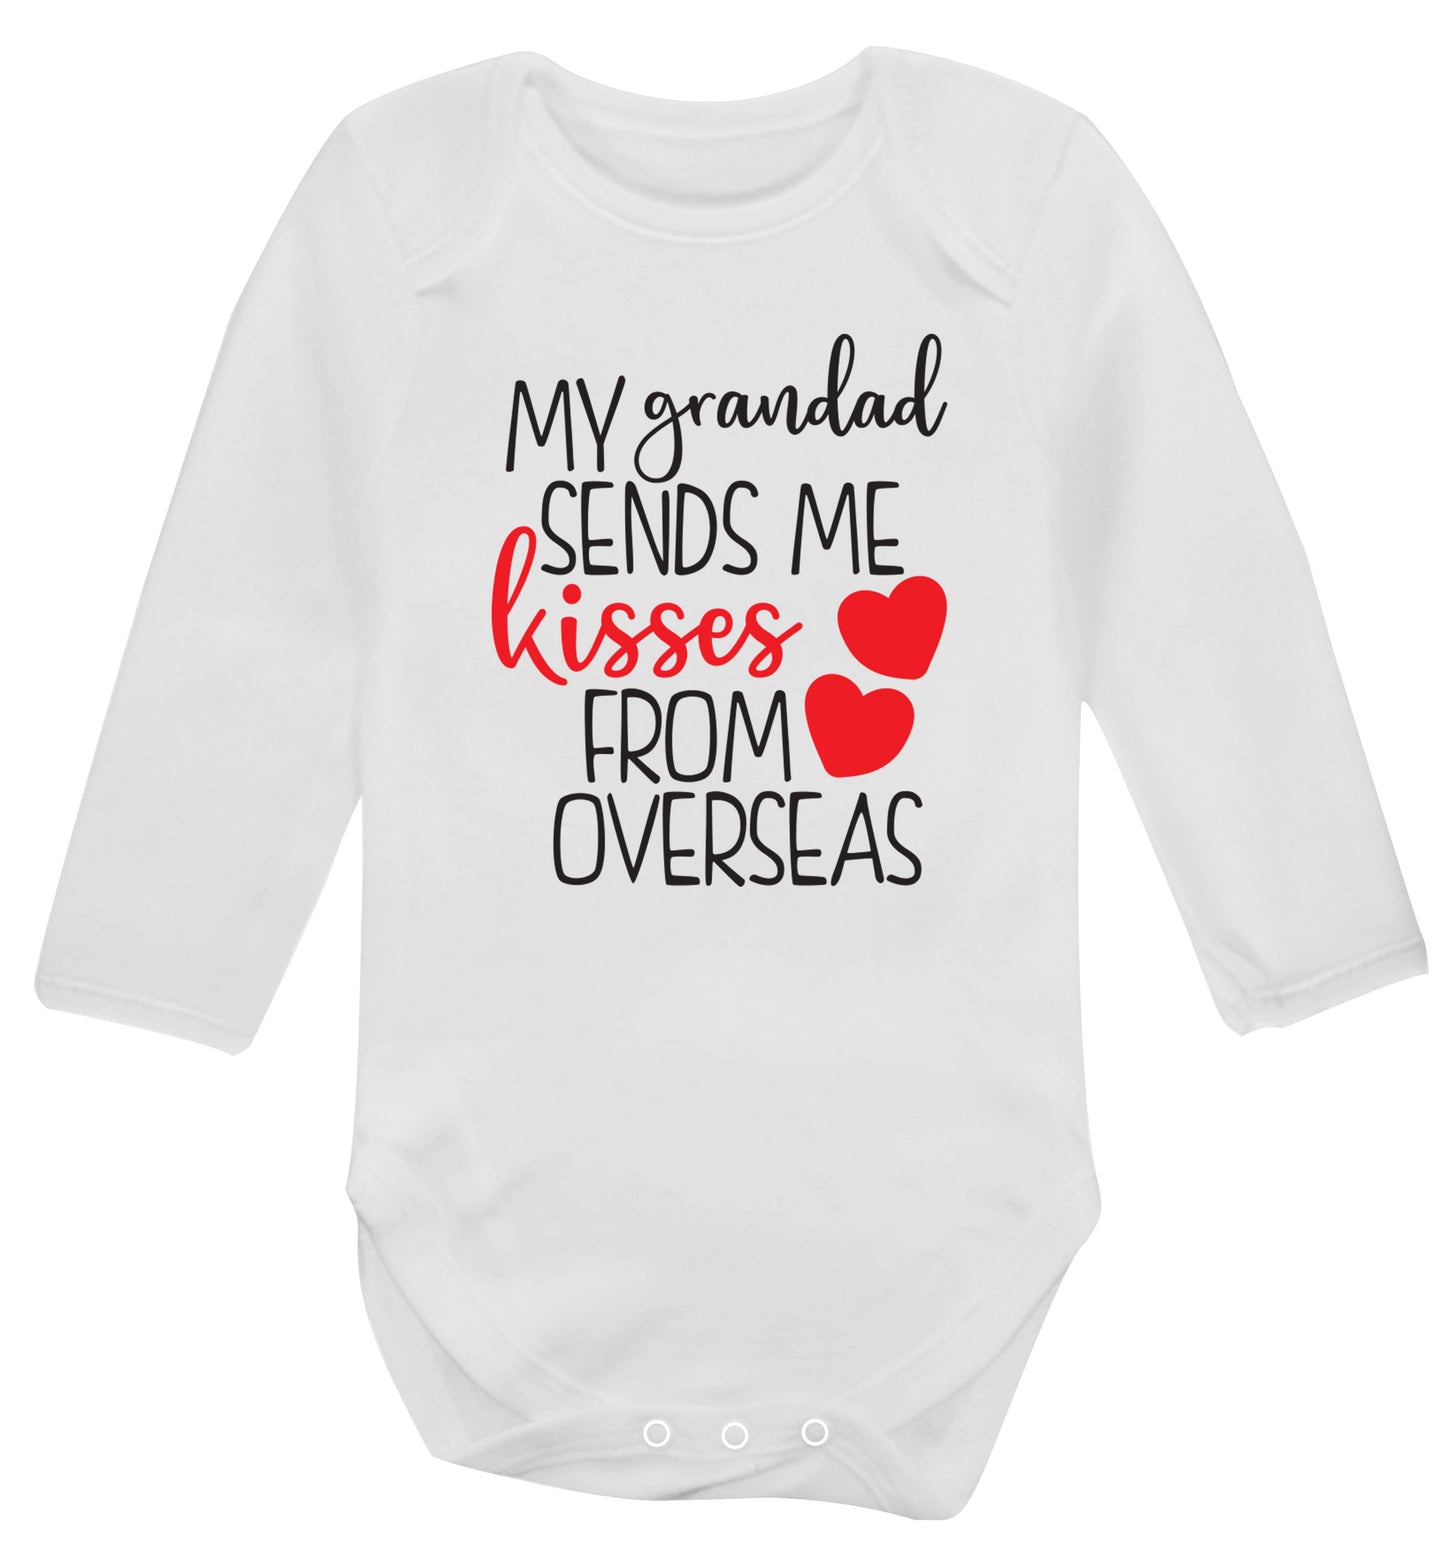 My Grandad sends me kisses from overseas Baby Vest long sleeved white 6-12 months